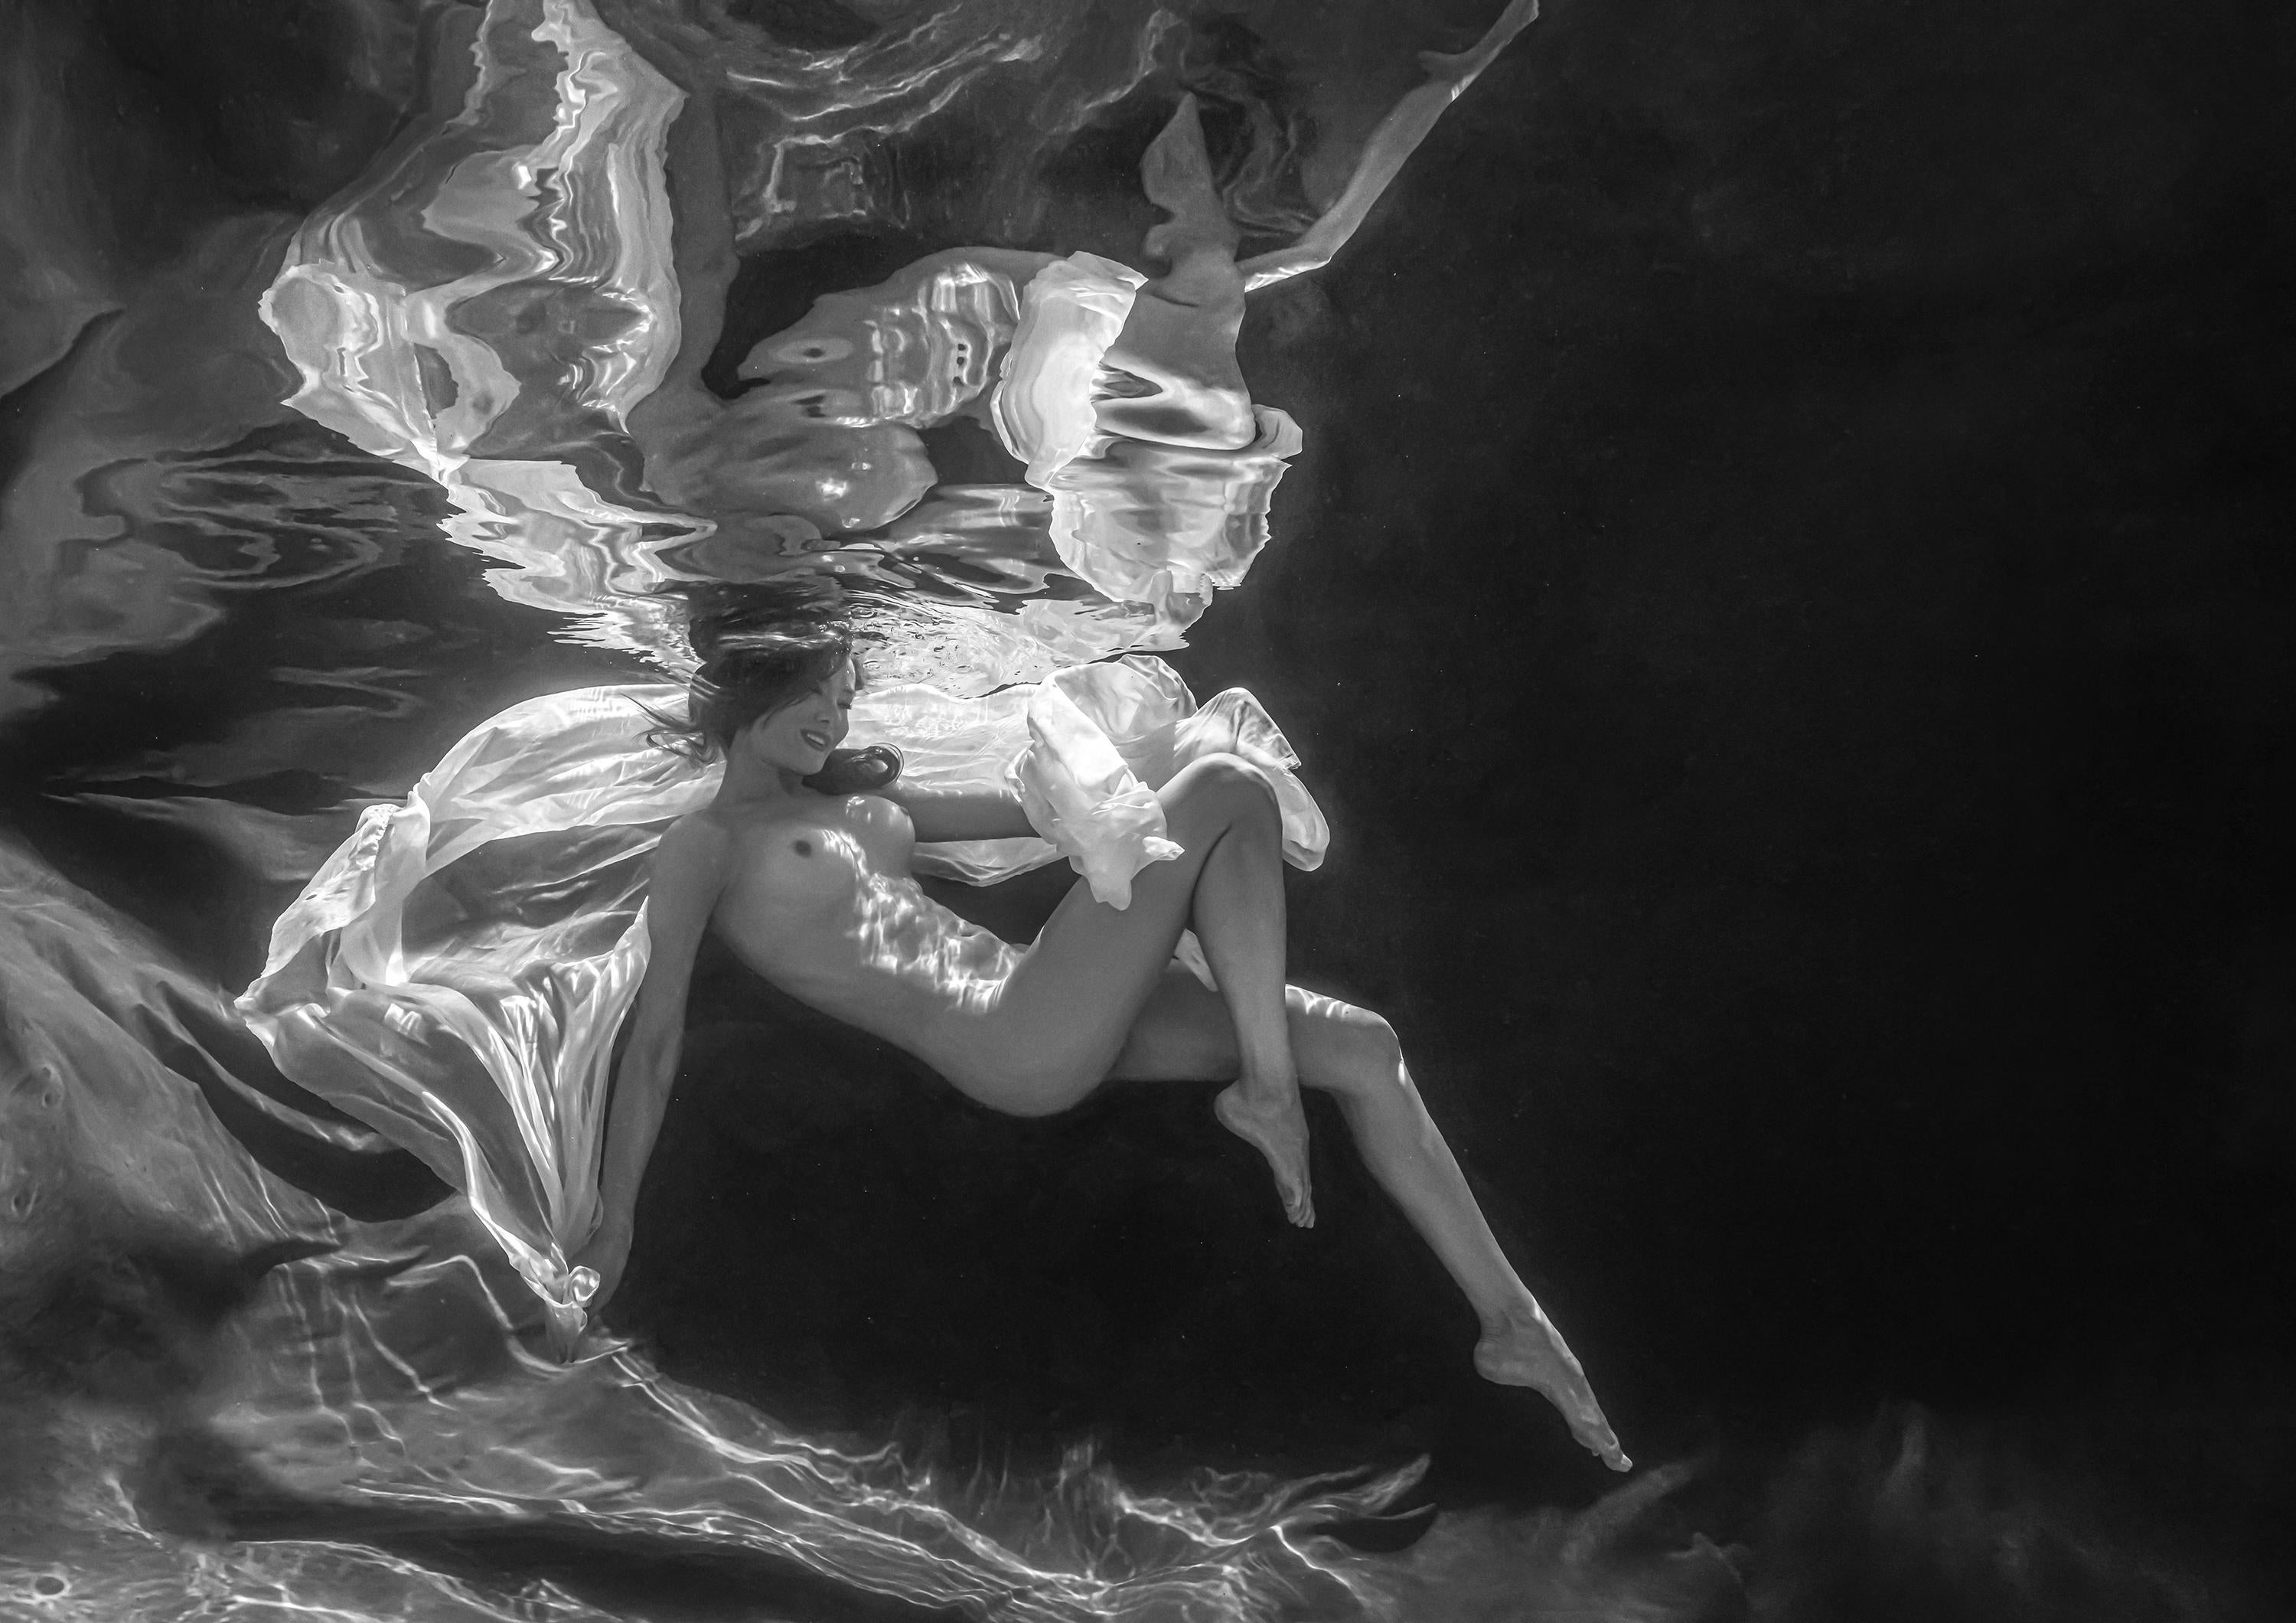 Alex Sher Black and White Photograph - In the Hall of the Mountain King - underwater b&w nude photograph - paper 16x24"